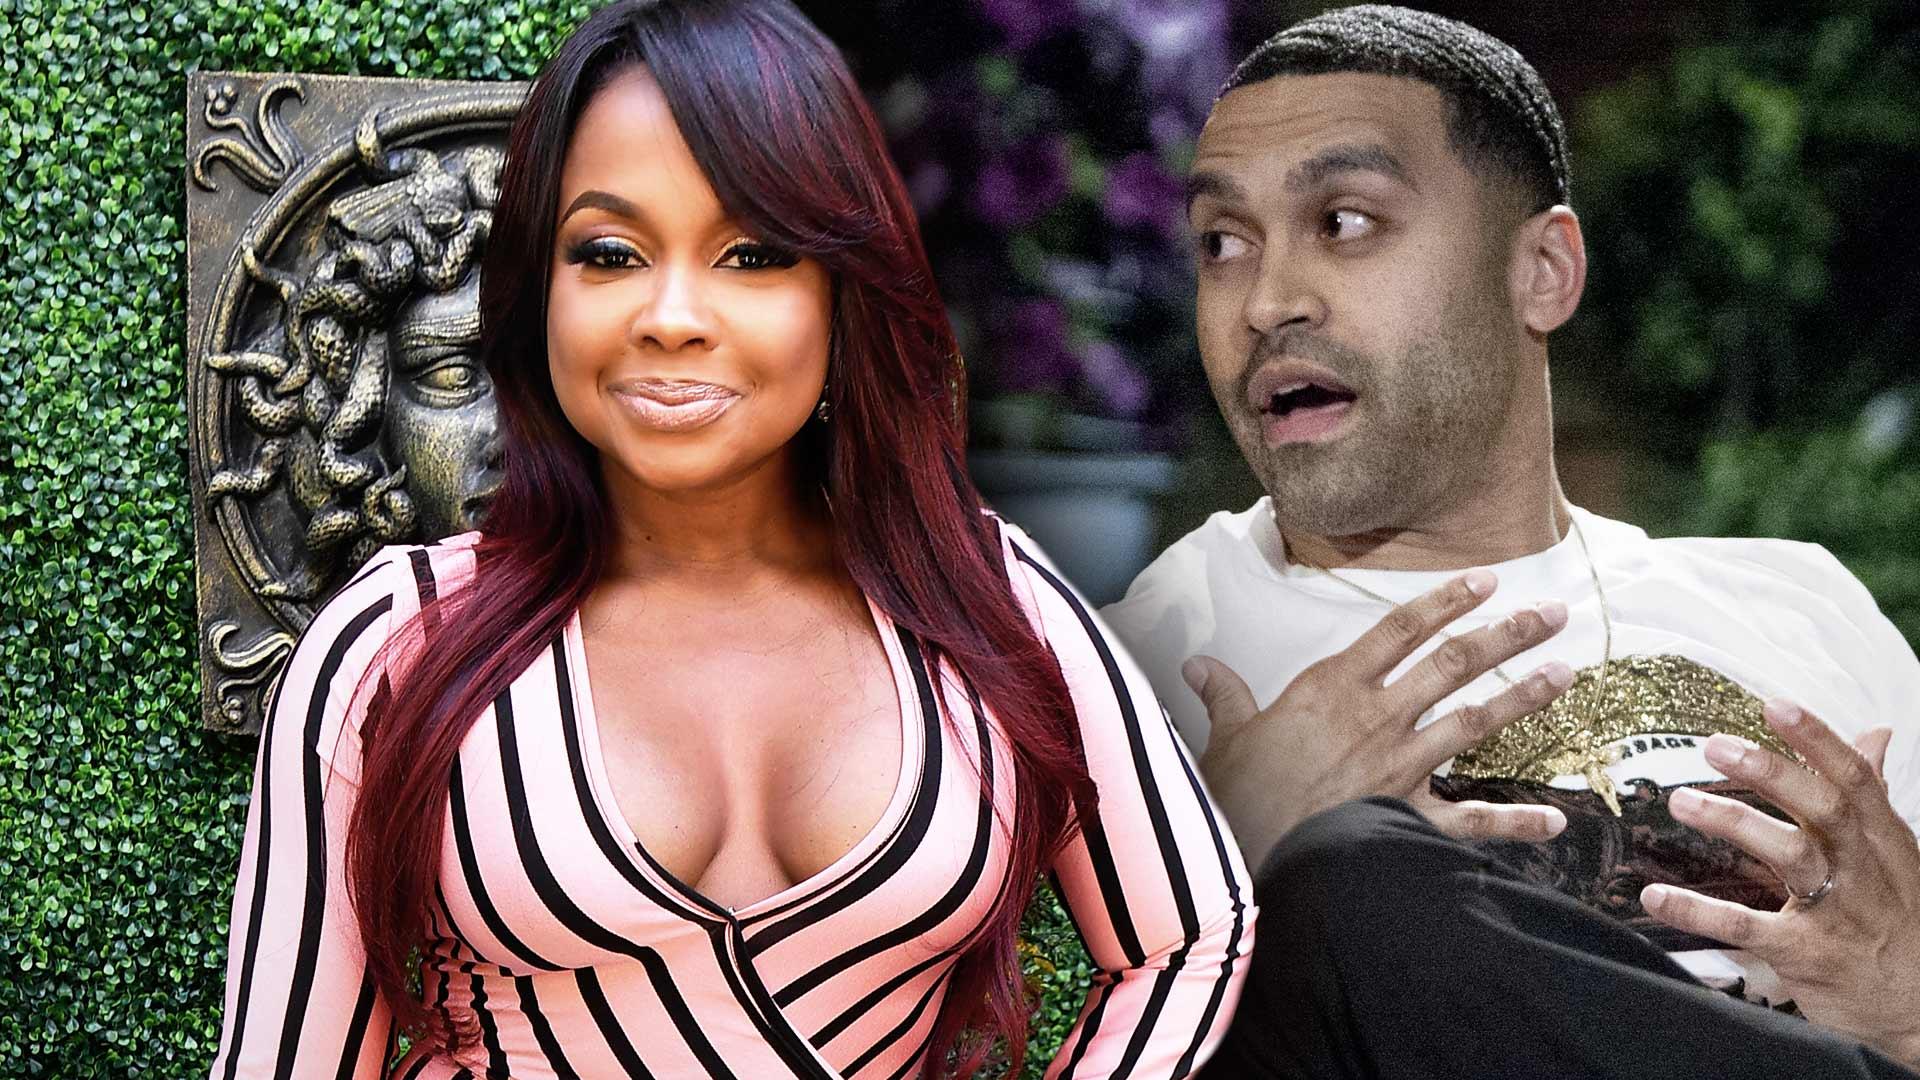 ‘RHOA’ Star Phaedra Parks’ Ex-Husband Apollo Nida Getting Out of Prison One Year Early